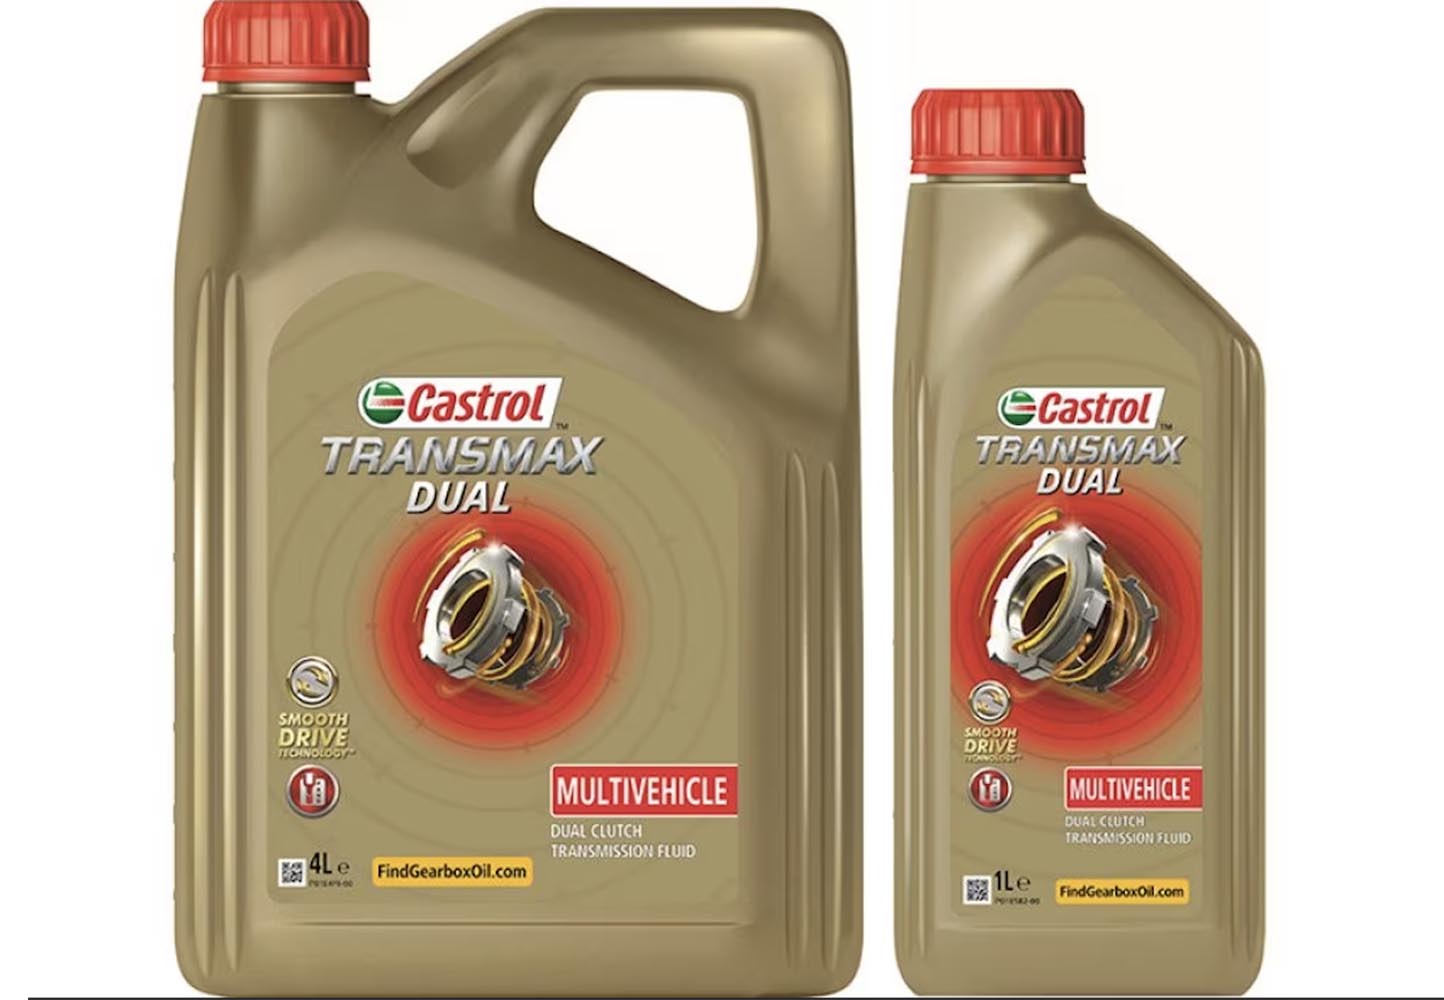 Castrol introduces new gear oil for dual-clutch transmissions